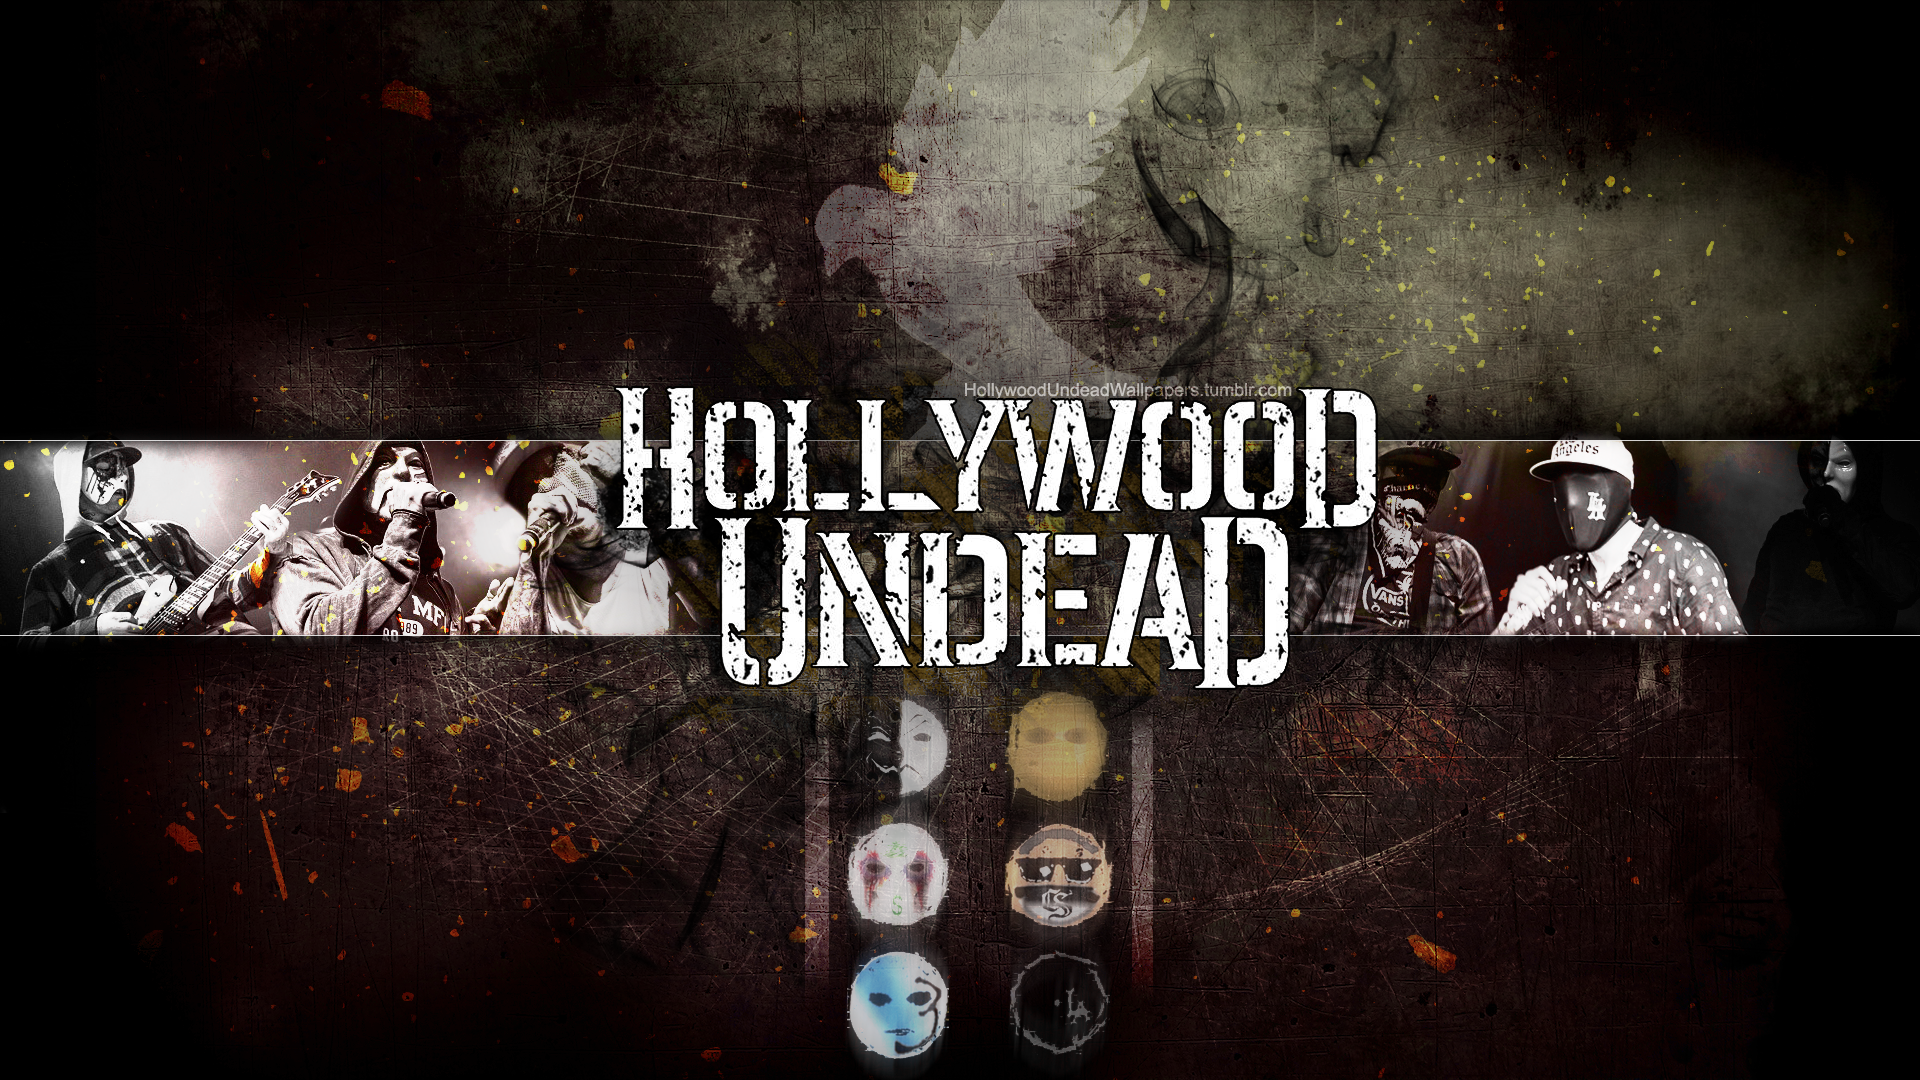 Hollywood Undead   DotD Wallpaper w Mask Icons by emirulug on